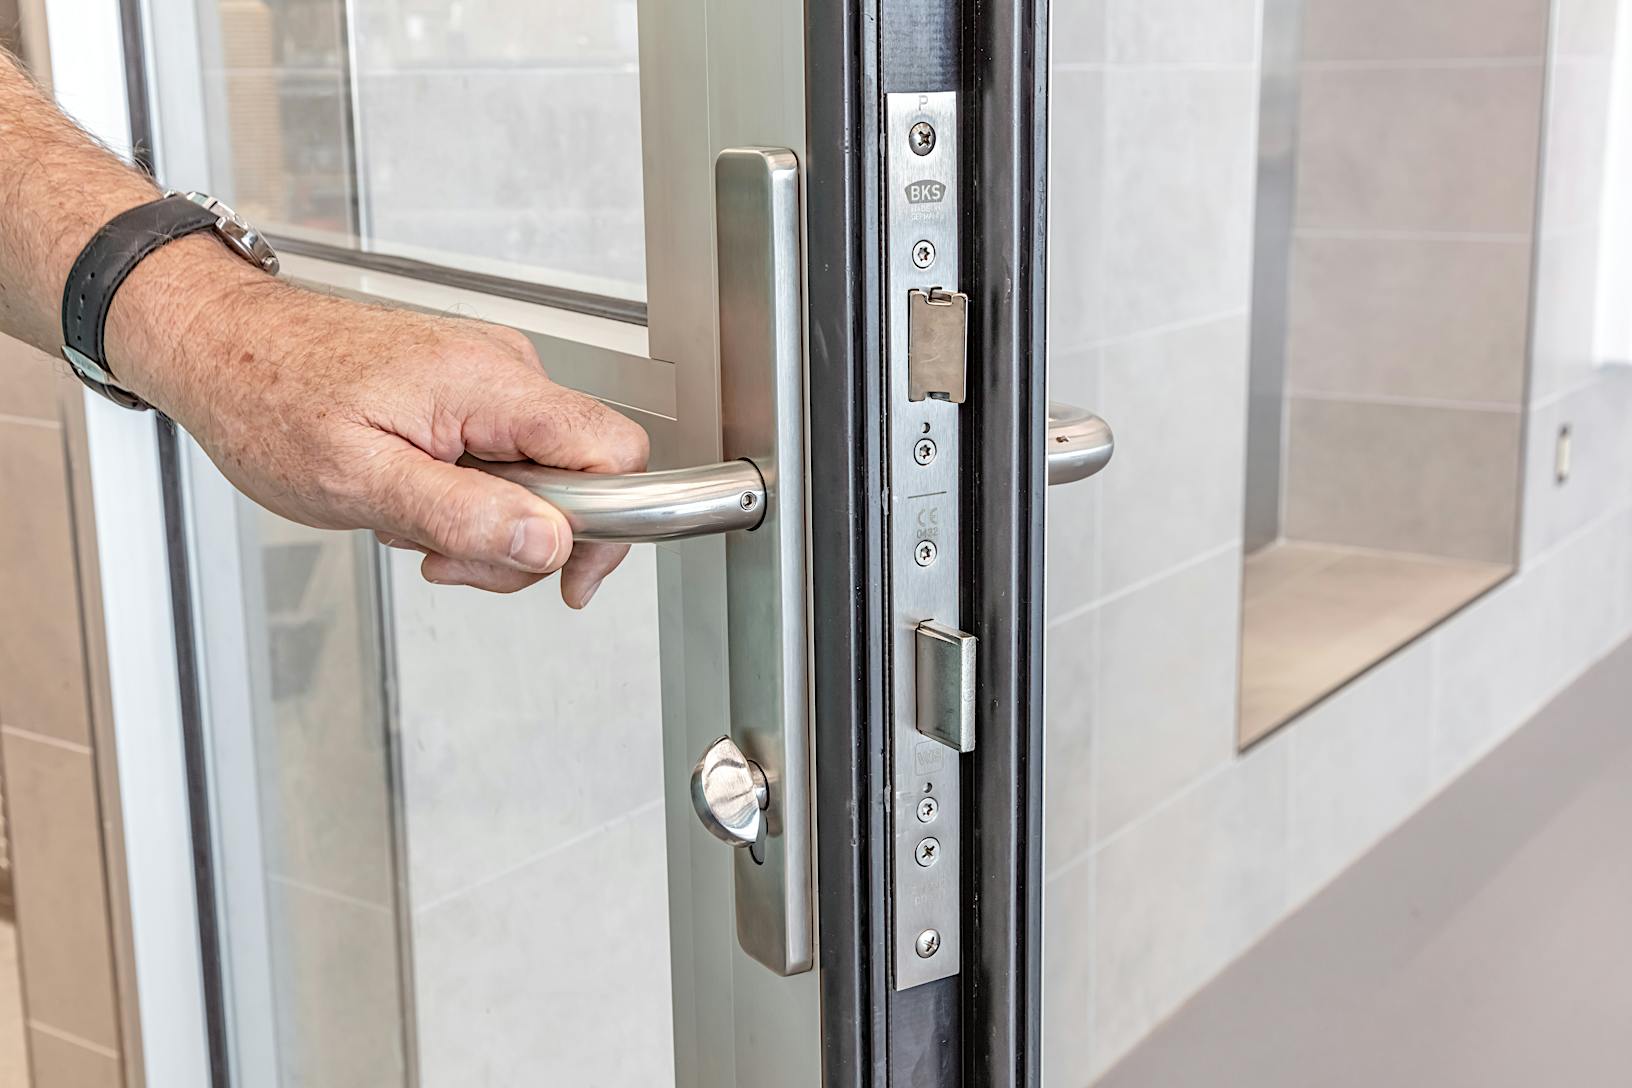 Acoustical movable glass walls - ADA compliant commercial locking options